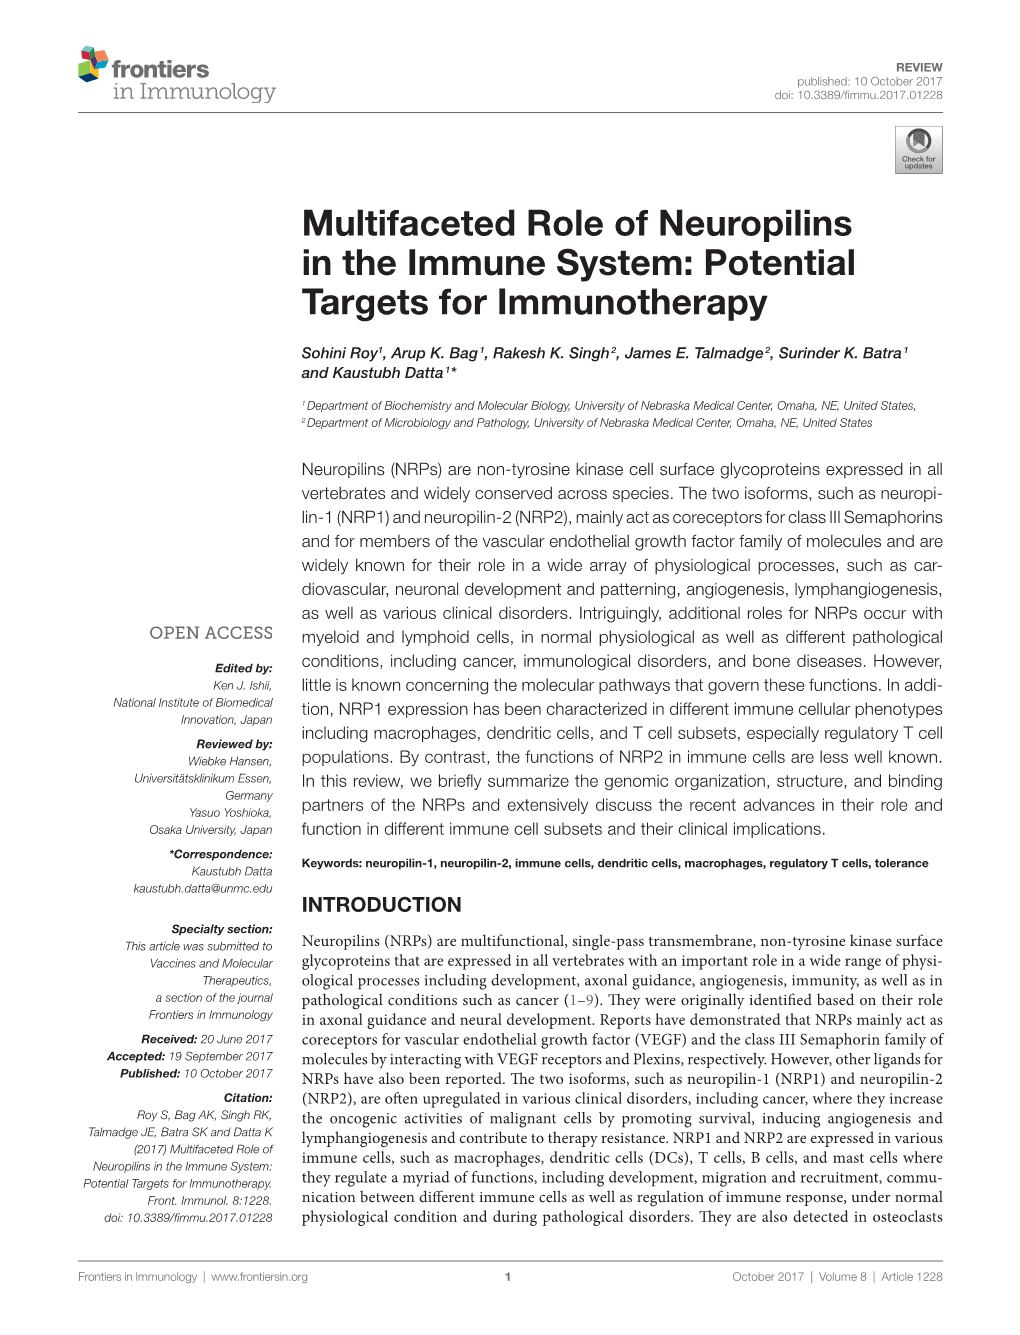 Multifaceted Role of Neuropilins in the Immune System: Potential Targets for Immunotherapy